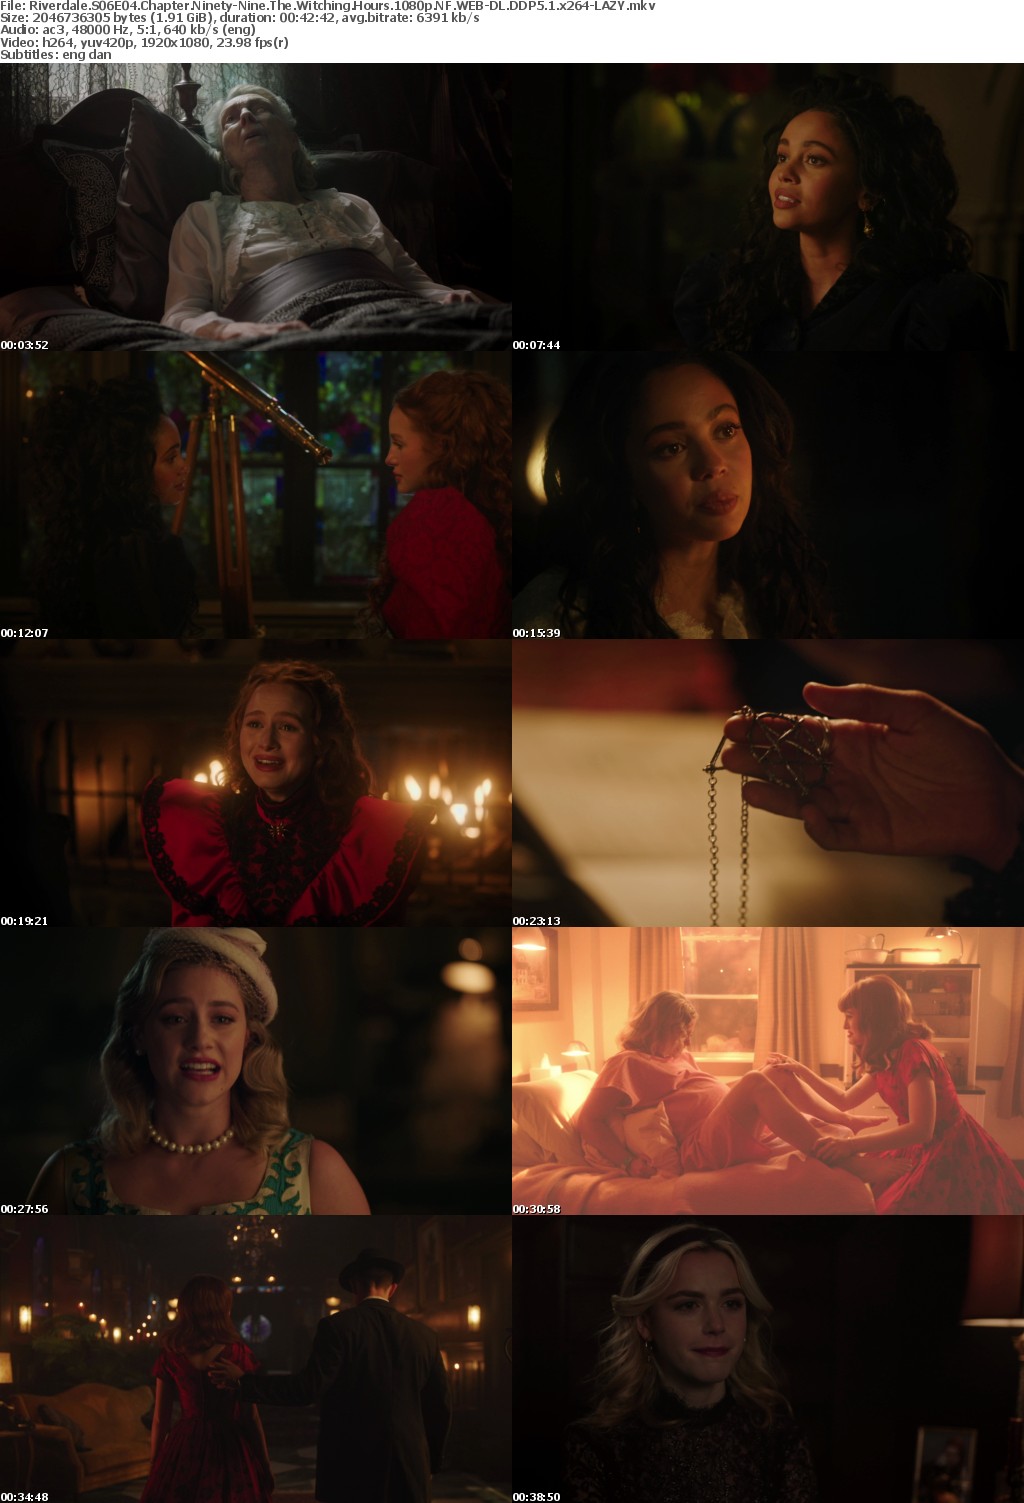 Riverdale US S06E04 Chapter Ninety-Nine The Witching Hours 1080p NF WEBRip DDP5 1 x264-LAZY